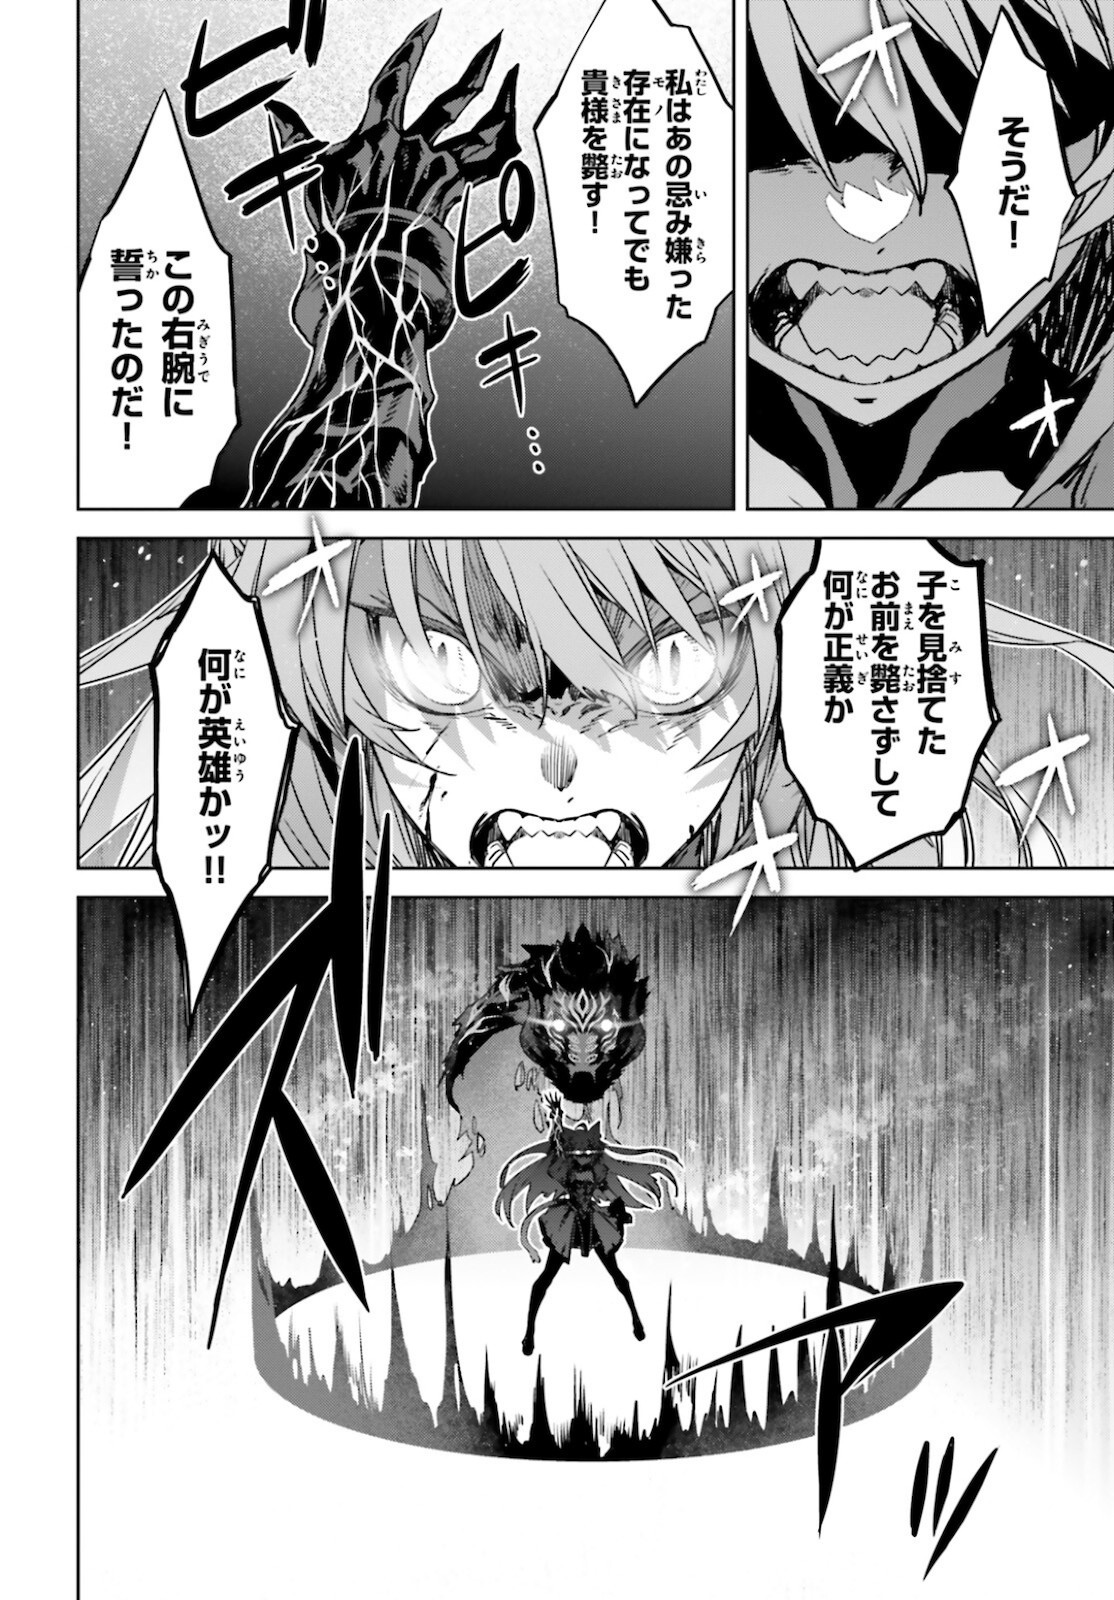 Fate-Apocrypha - Chapter 55-1 - Page 8